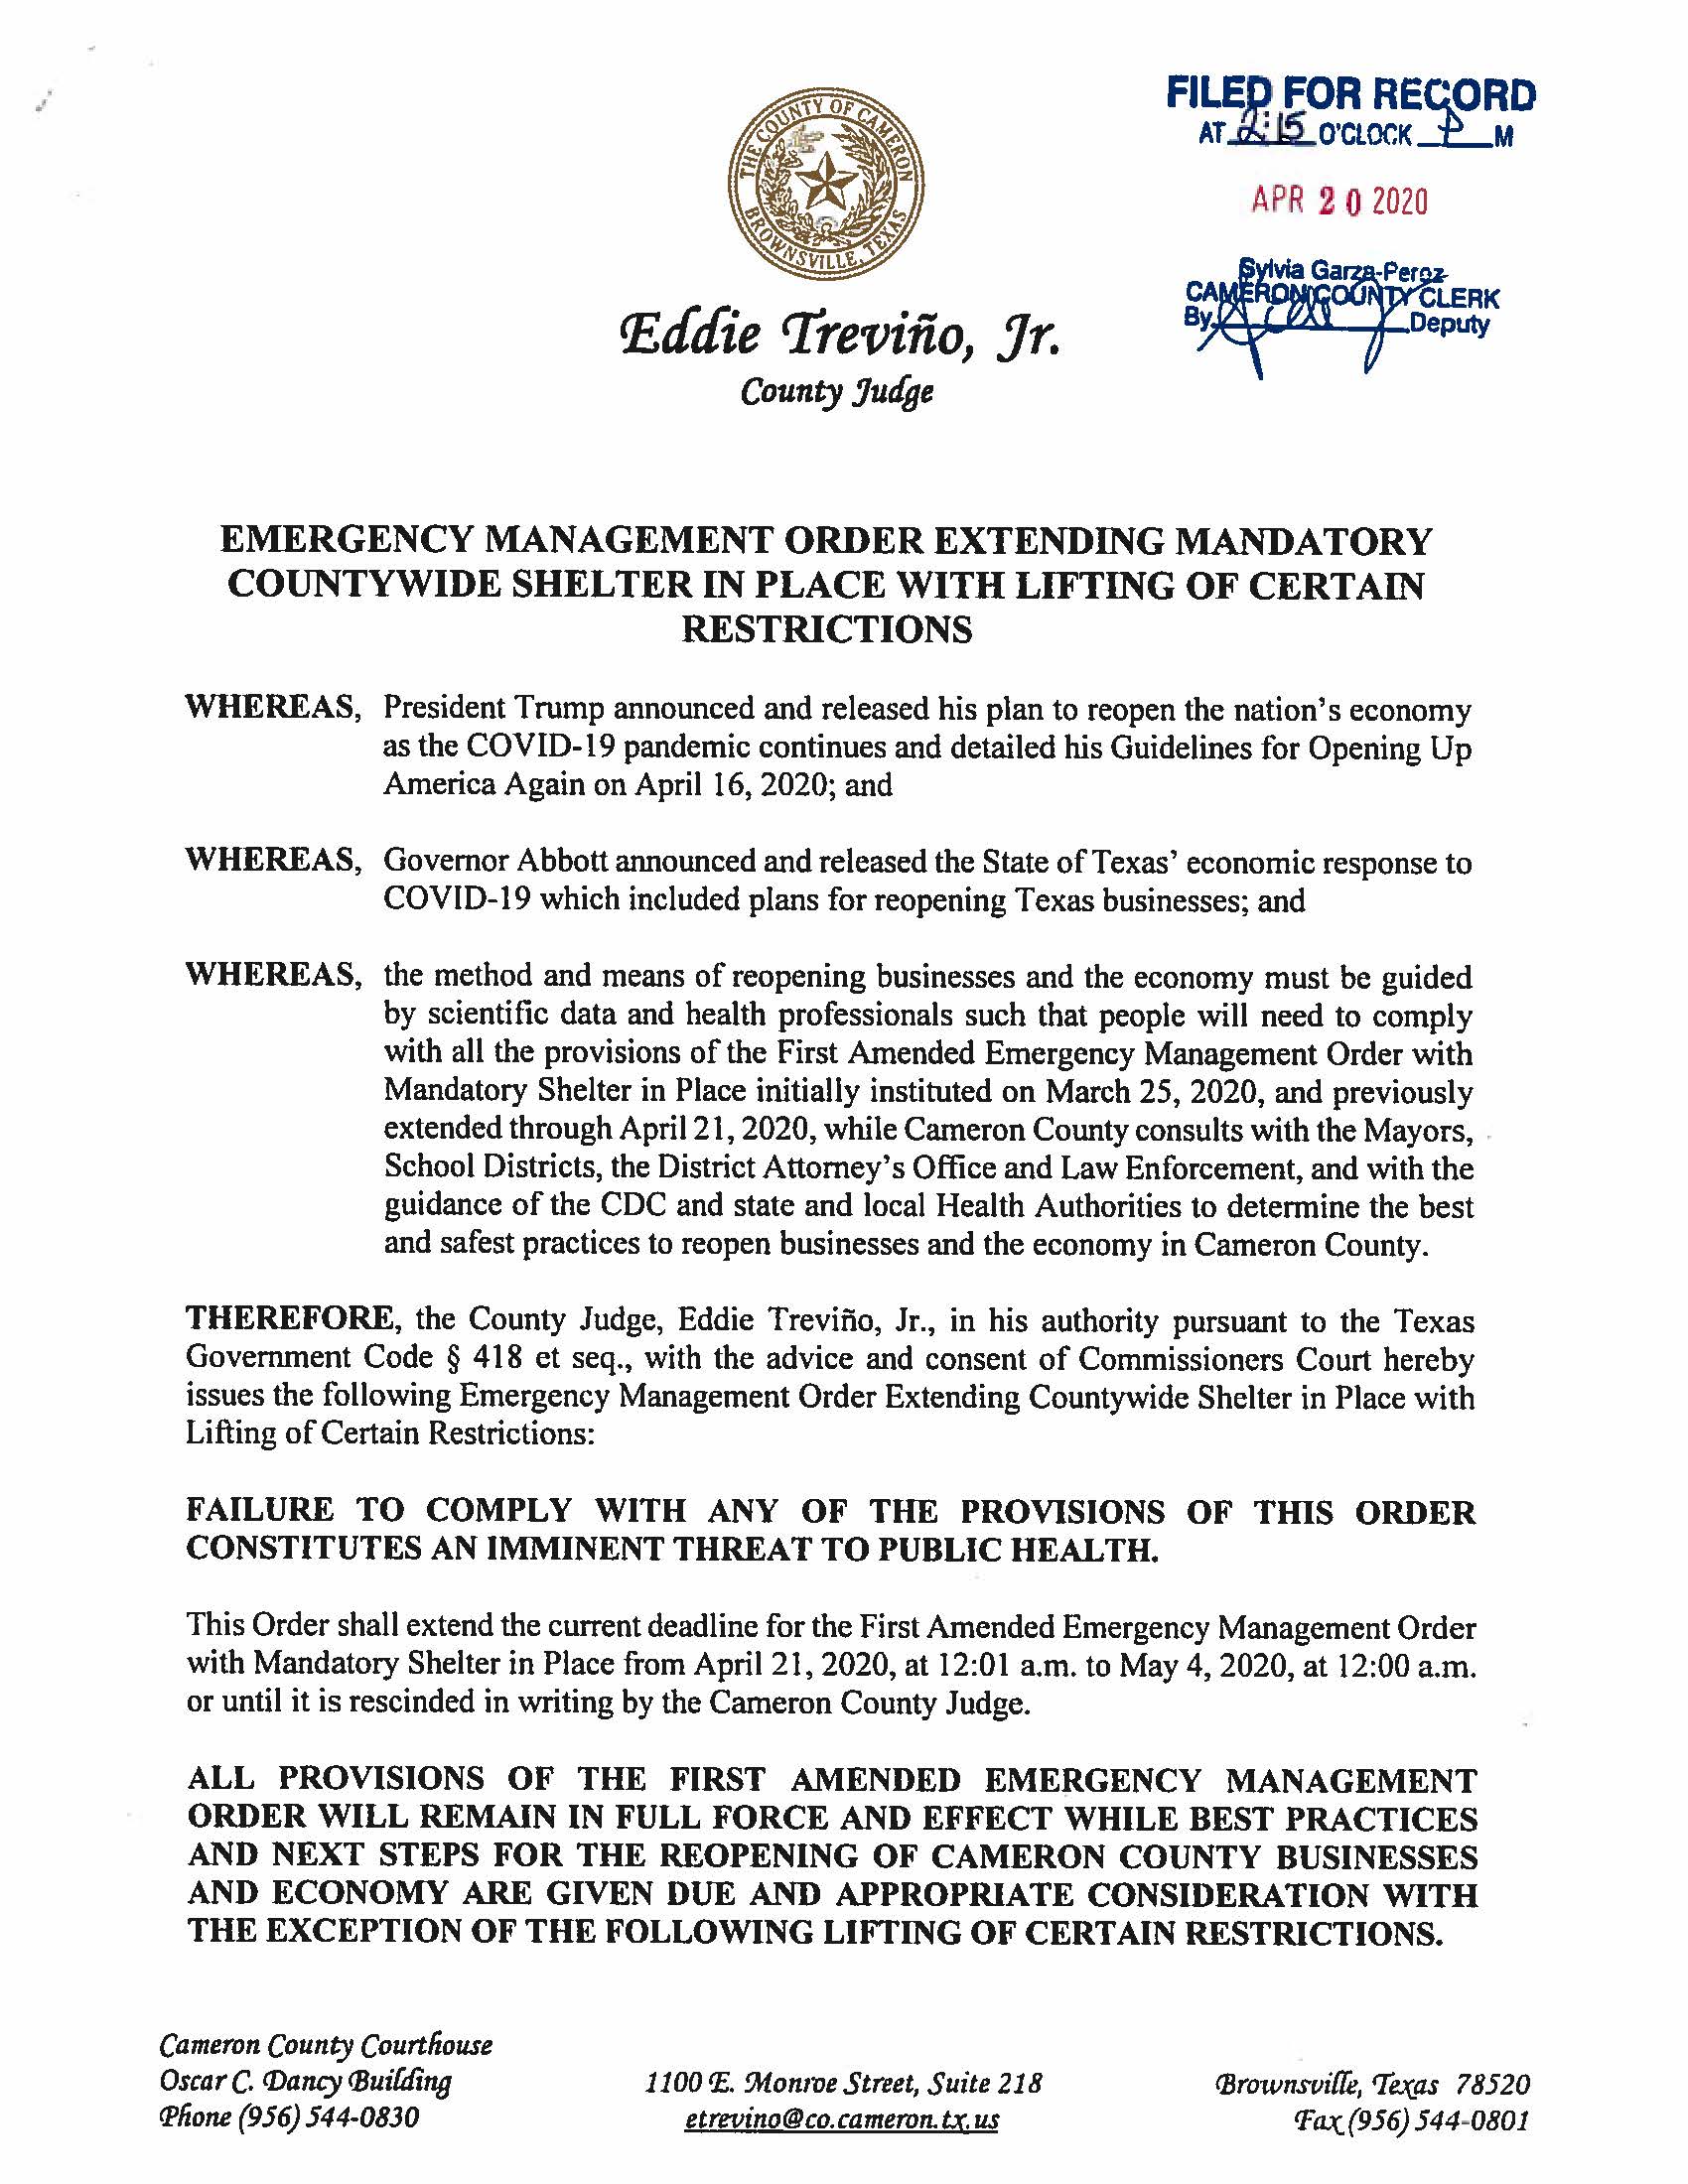 04.20.2020 Order EM Order Extending Countywide Shelter In Place With Lifting Of Certain Restrictions Page 1